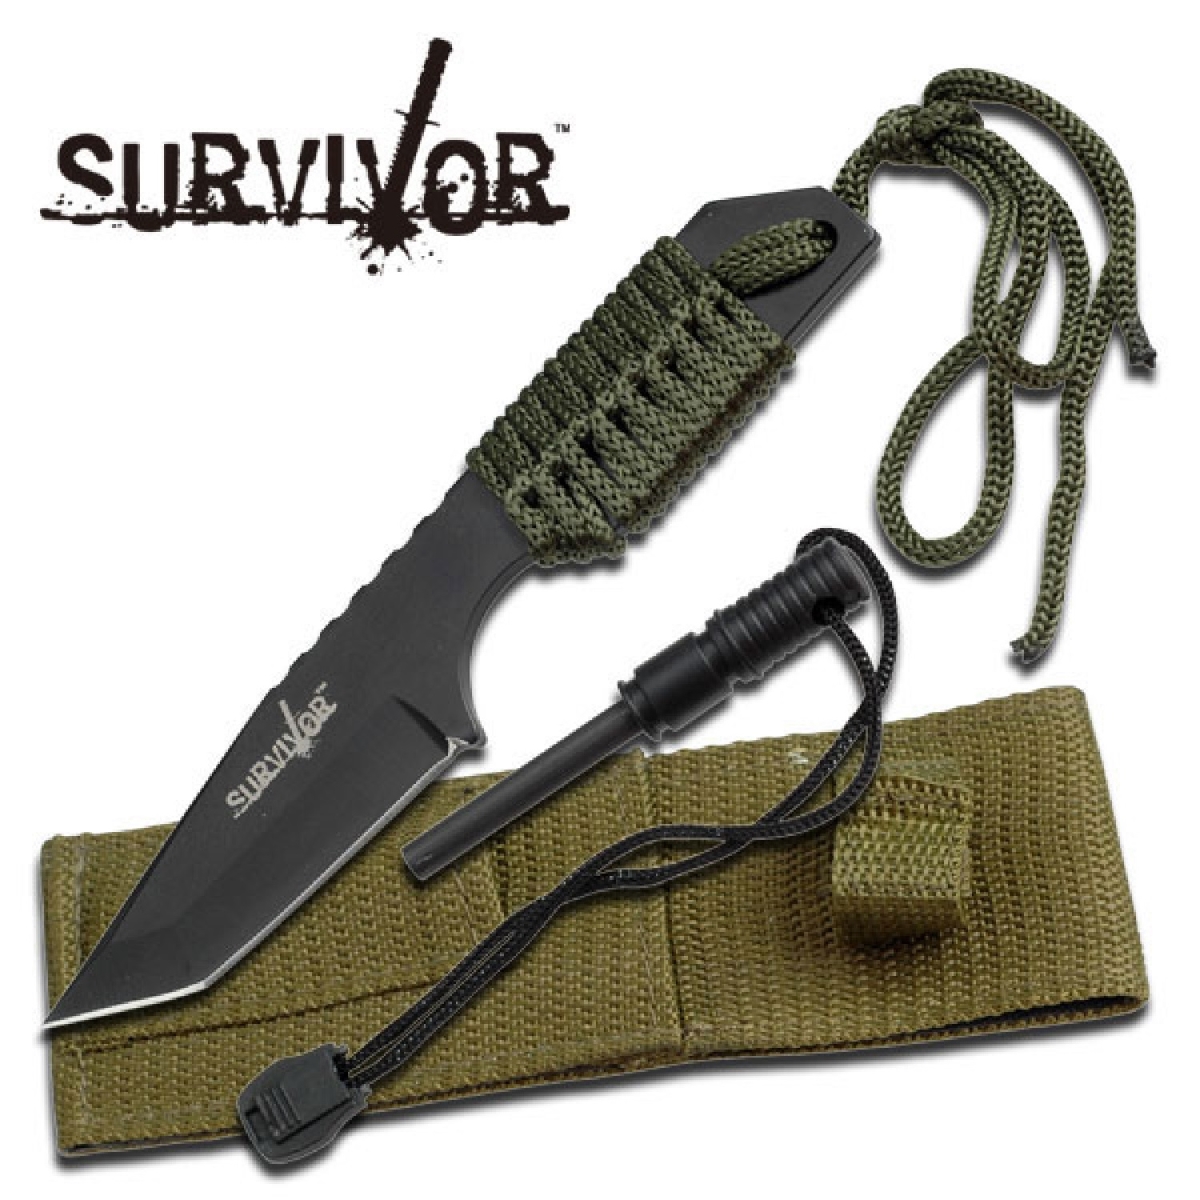 4018815 3.0 In. Fixed Knife Blade With Paracord Handle